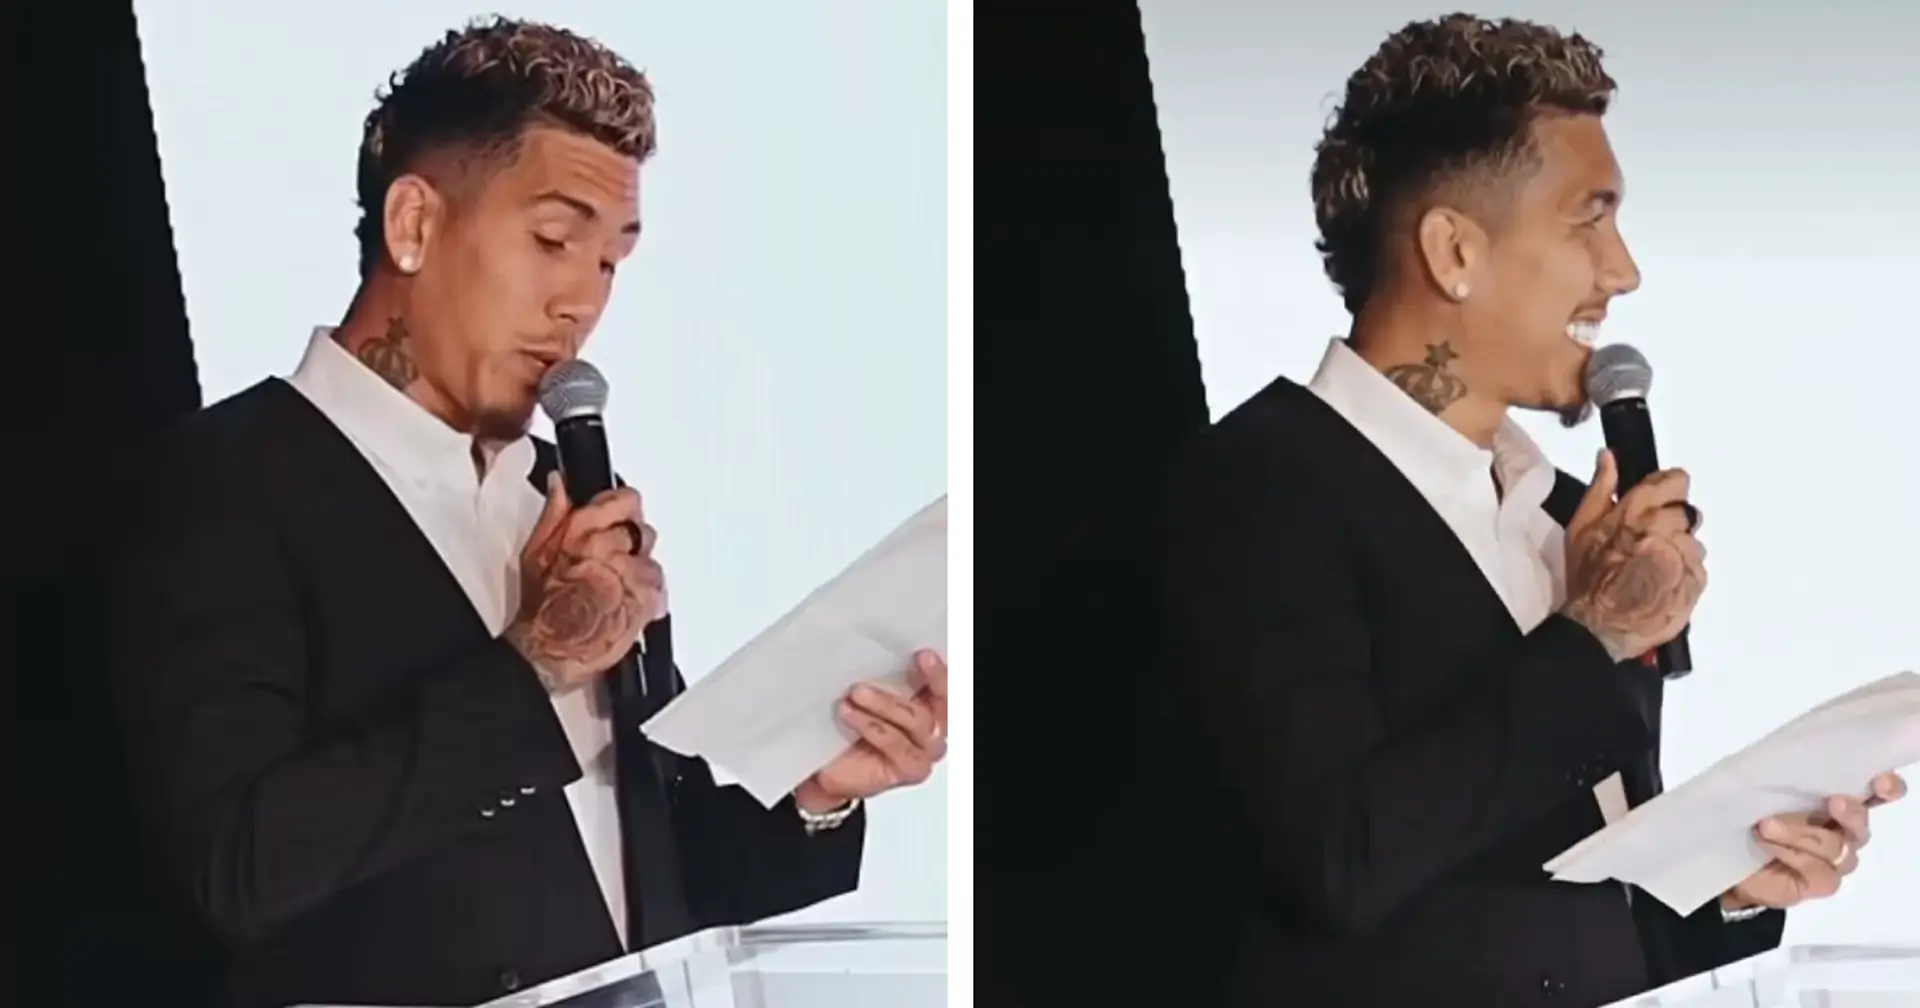 'It's been the honour of my life': Roberto Firmino's farewell message to Liverpool teammates released